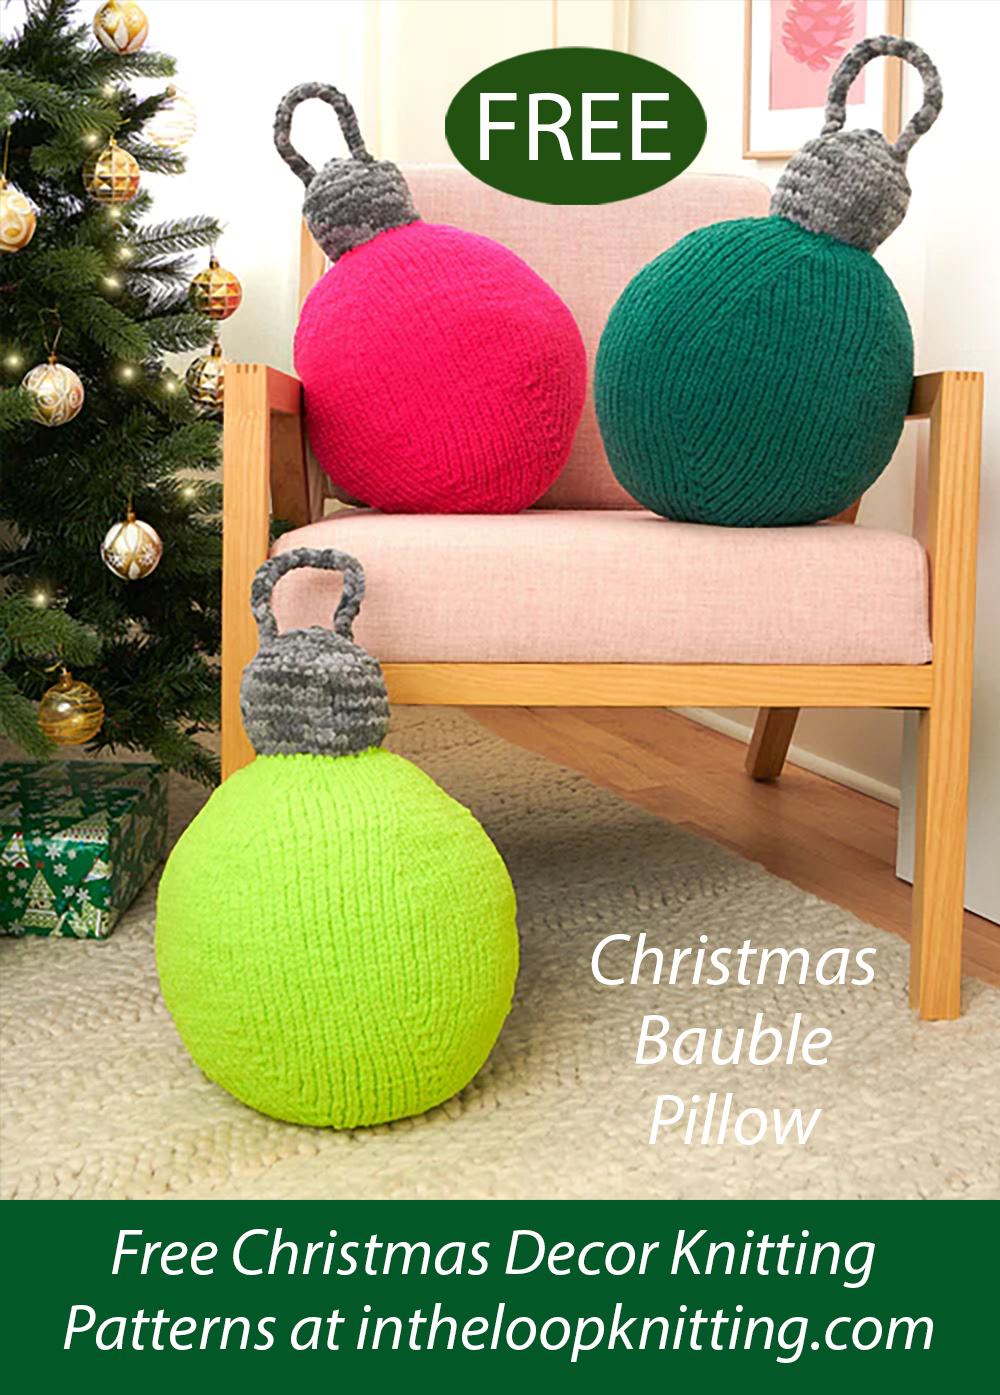 Free Christmas Jolly Bauble Pillow Knitting Pattern